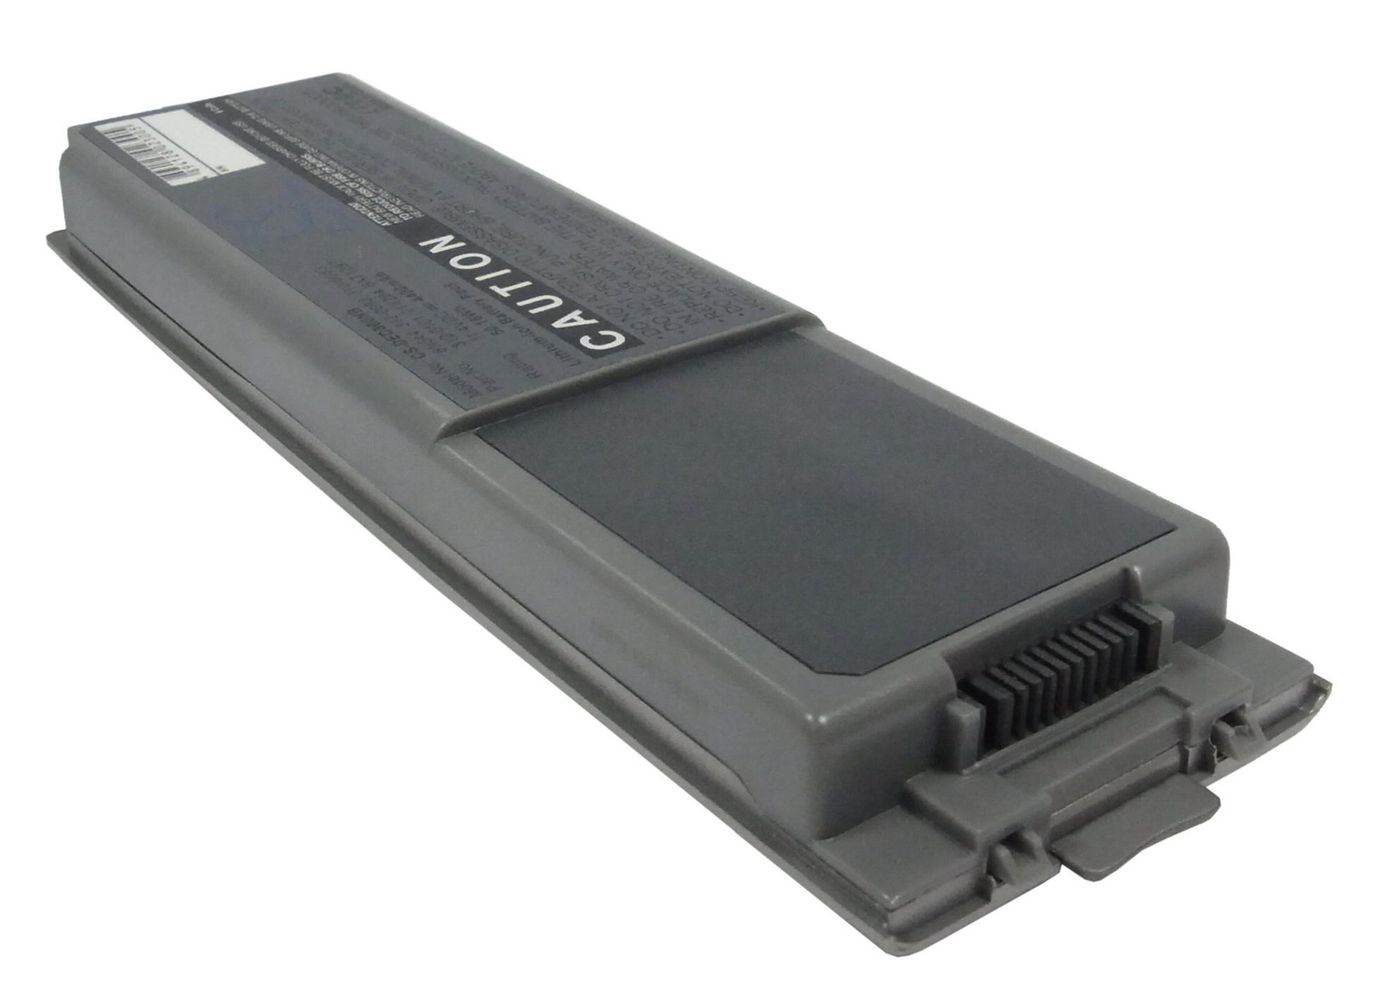 CoreParts MBXDE-BA0195 W125993396 Laptop Battery for Dell 